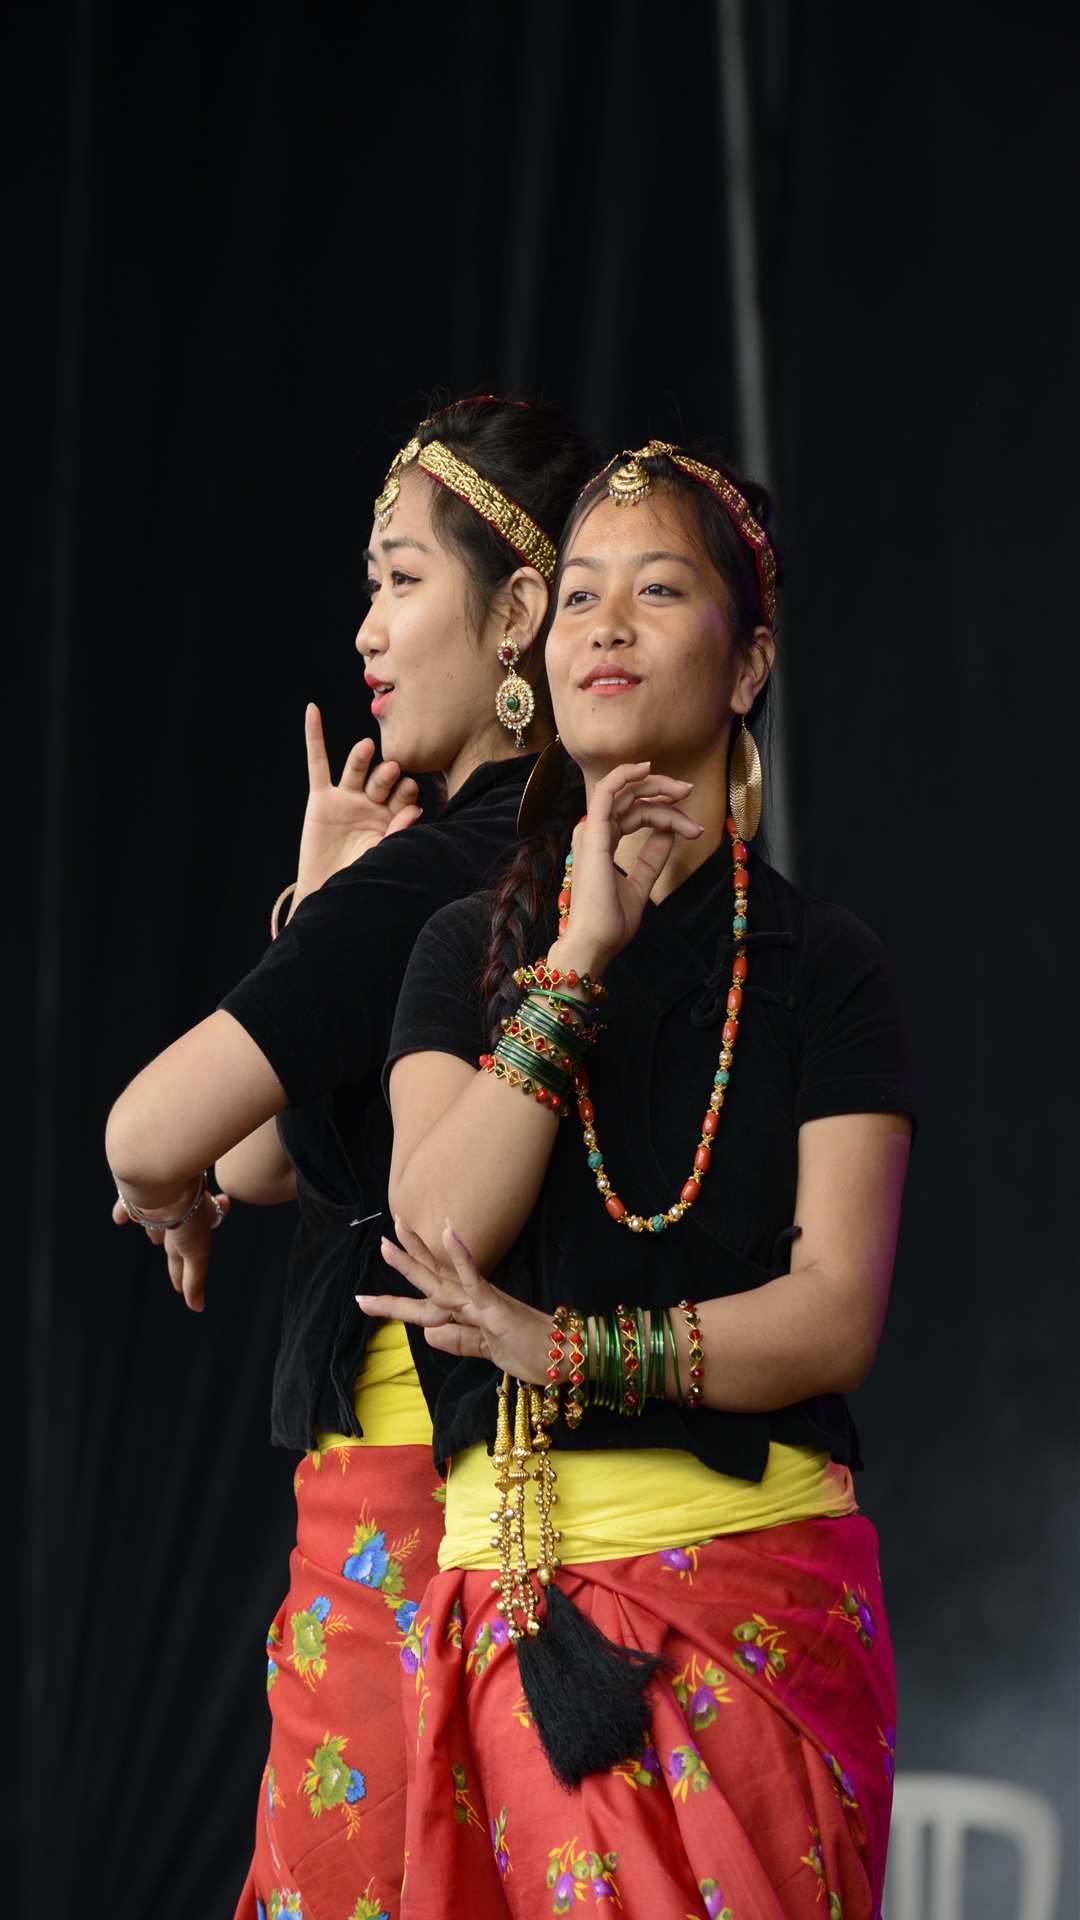 Dancers from the Nepalese community at last year's Mela